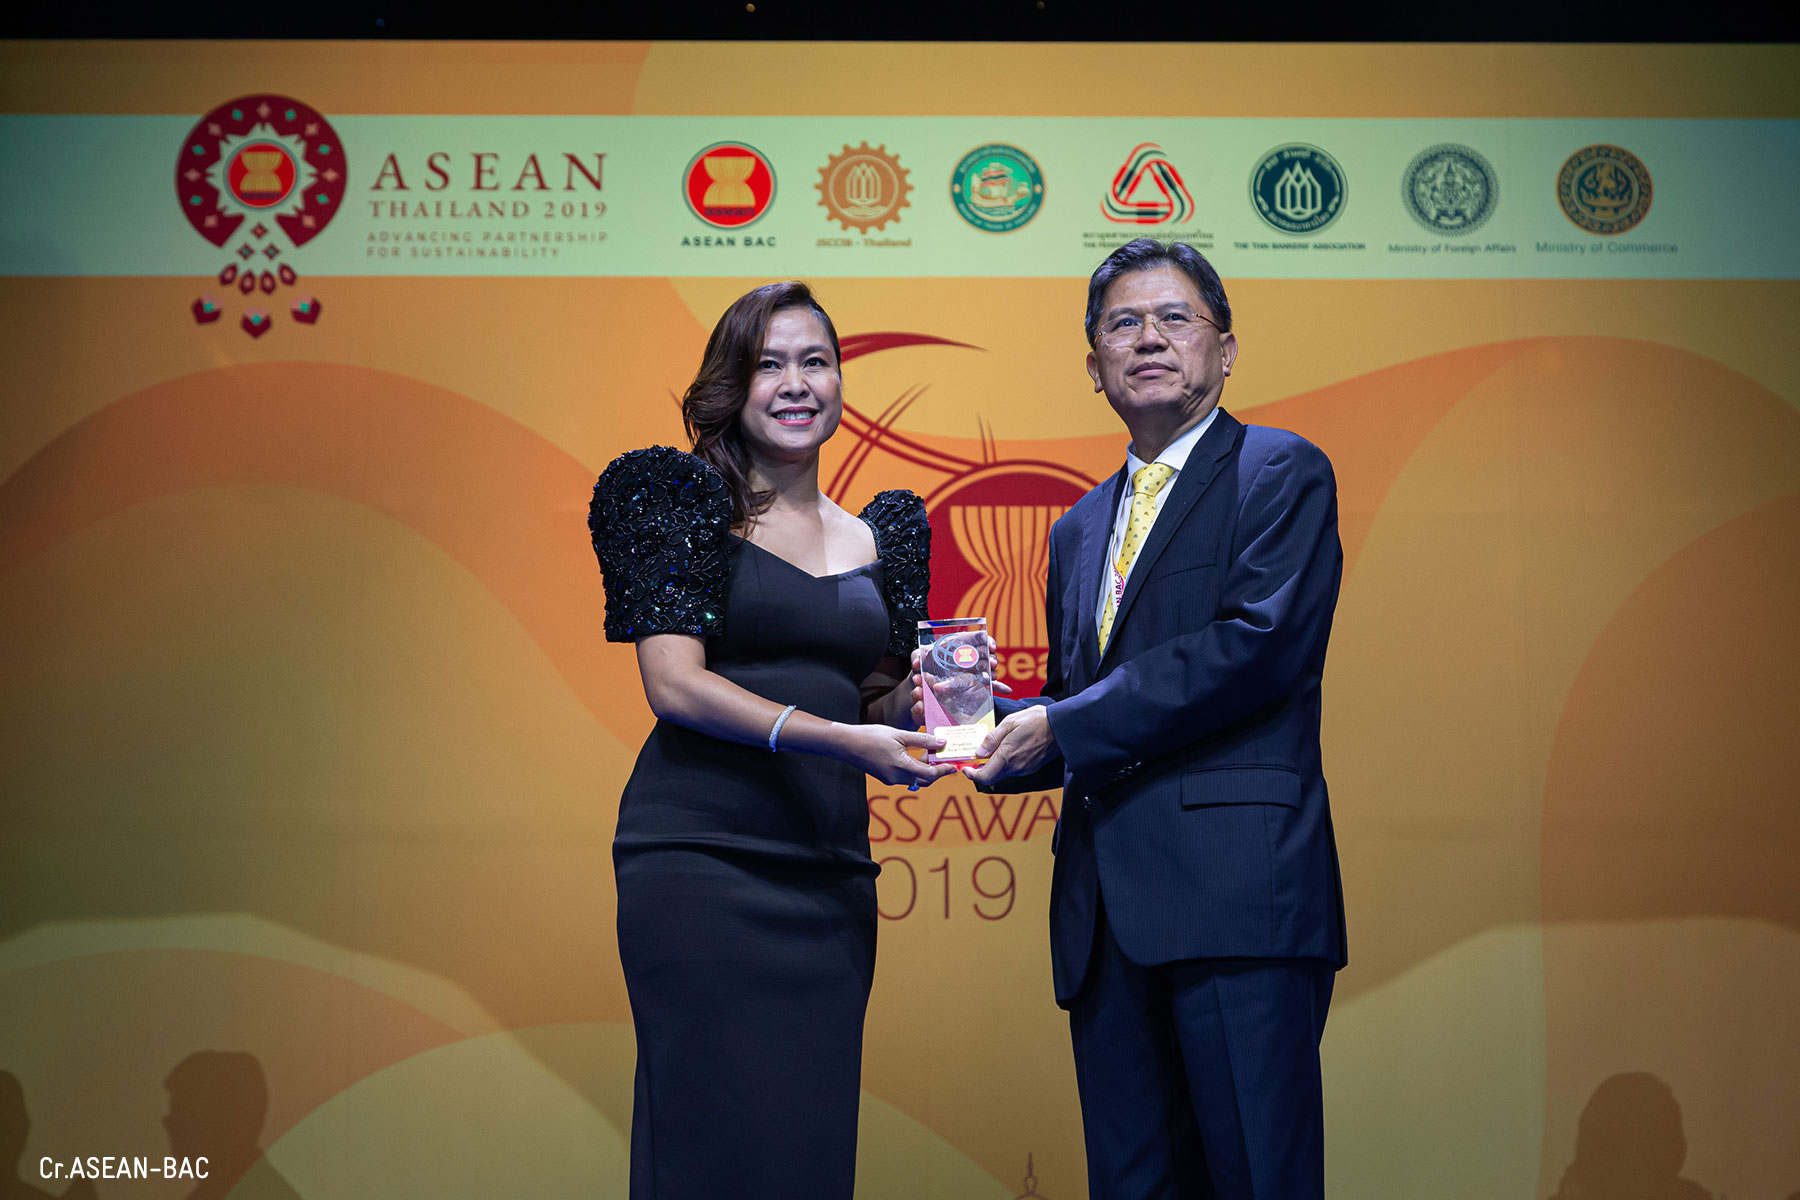 Acuatico receiving the trophy Simonette V. Gusi, General Manager of Acuatico Beach Resort & Hotel and Mr. Predee Daochai, Chairman of the Thai Bankers’ Association